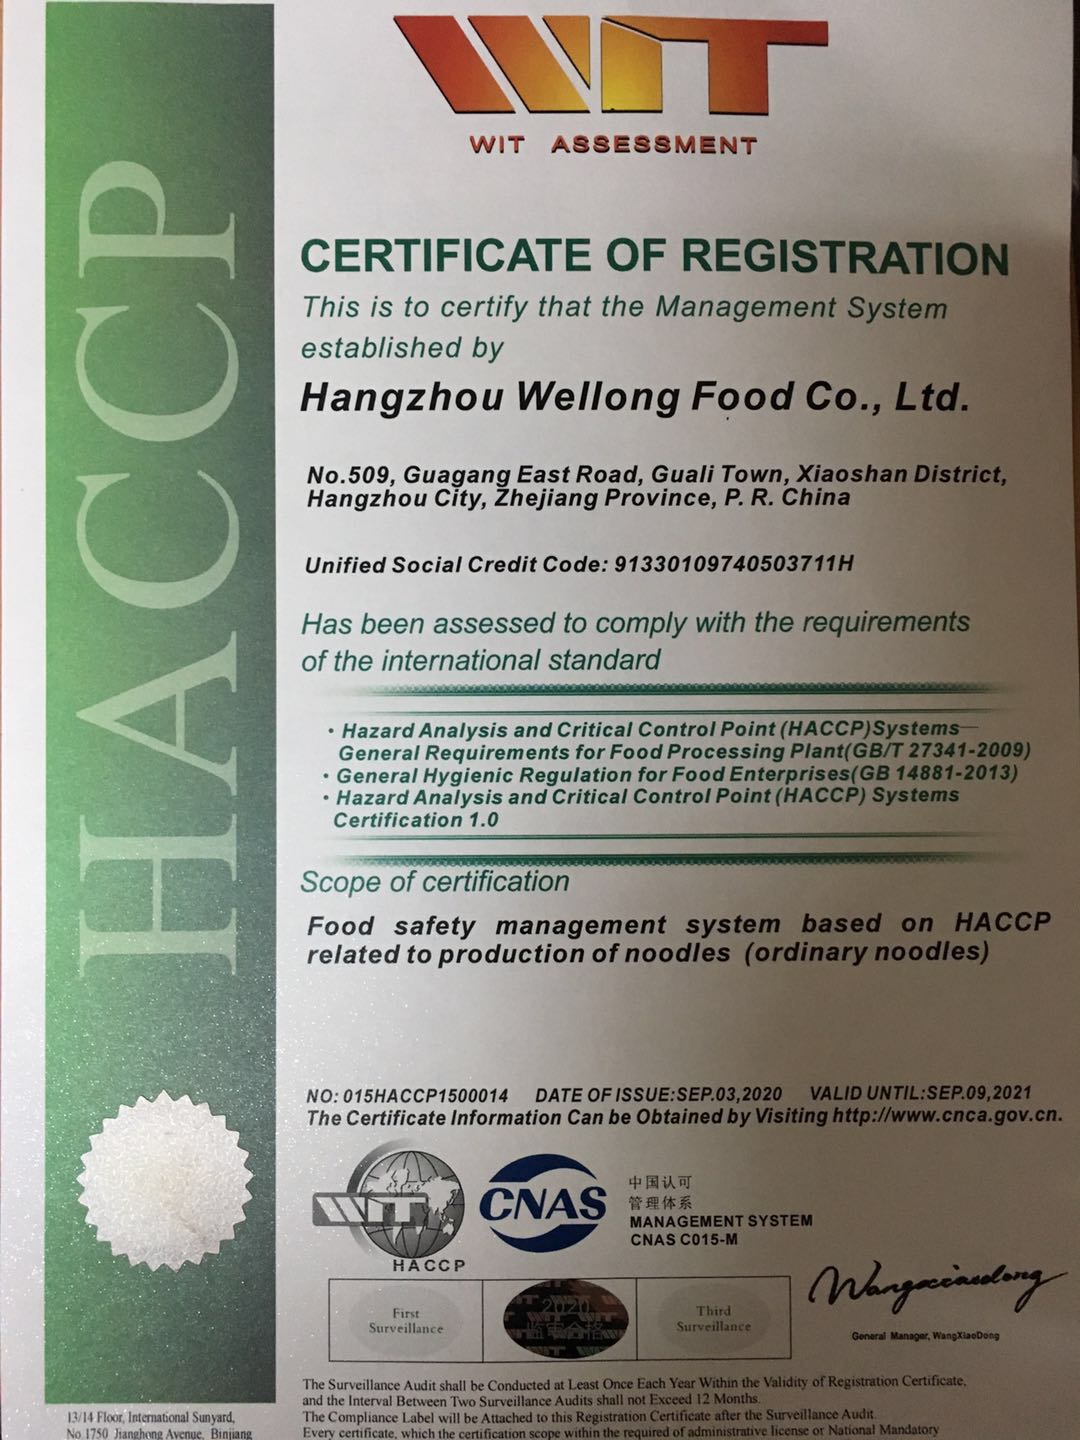 HACCP FOOD SAFETY CERTIFICATION